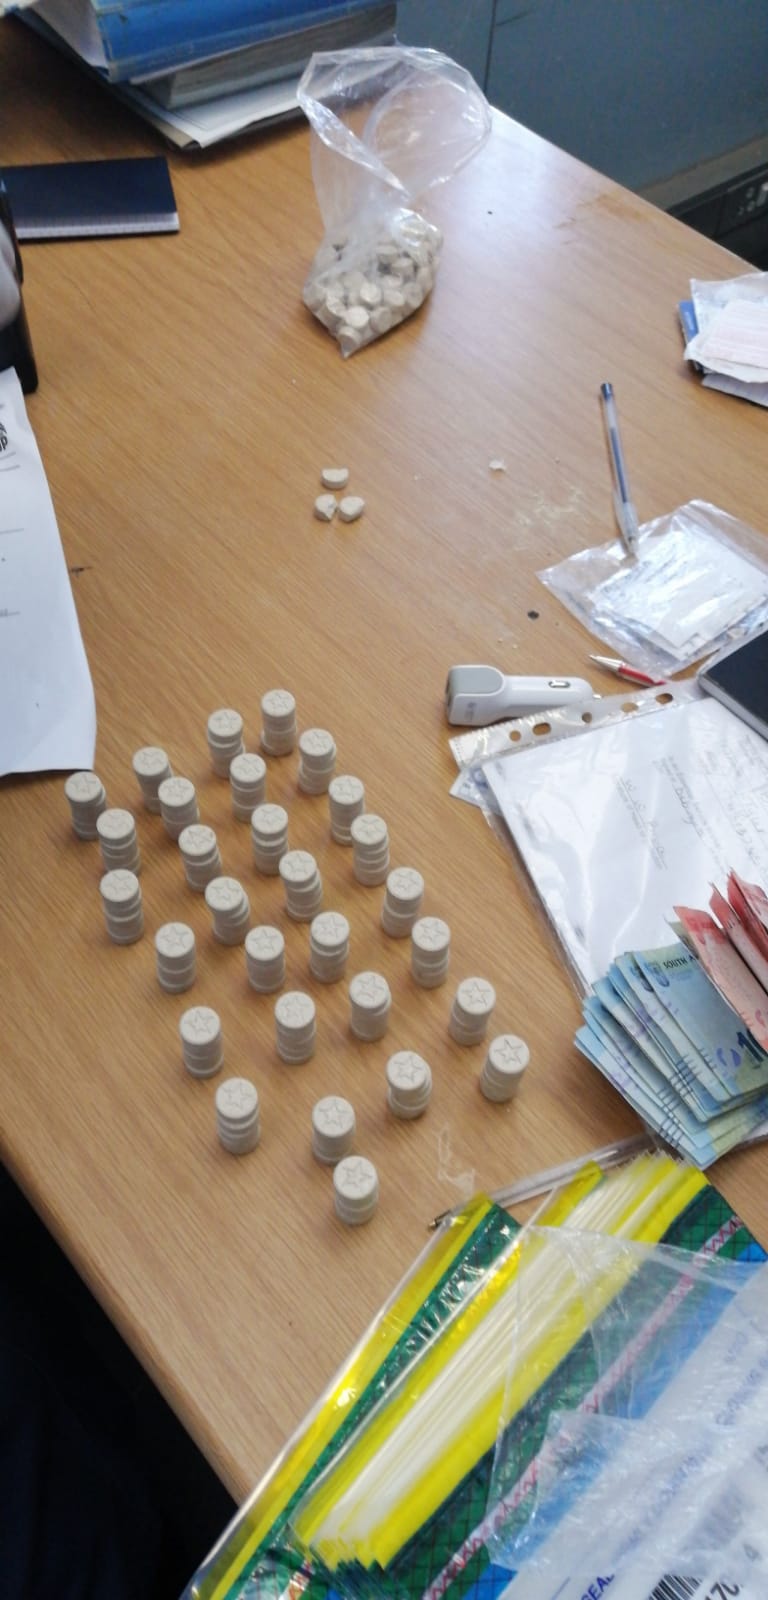 Suspect arrested for drugs in Galeshewe